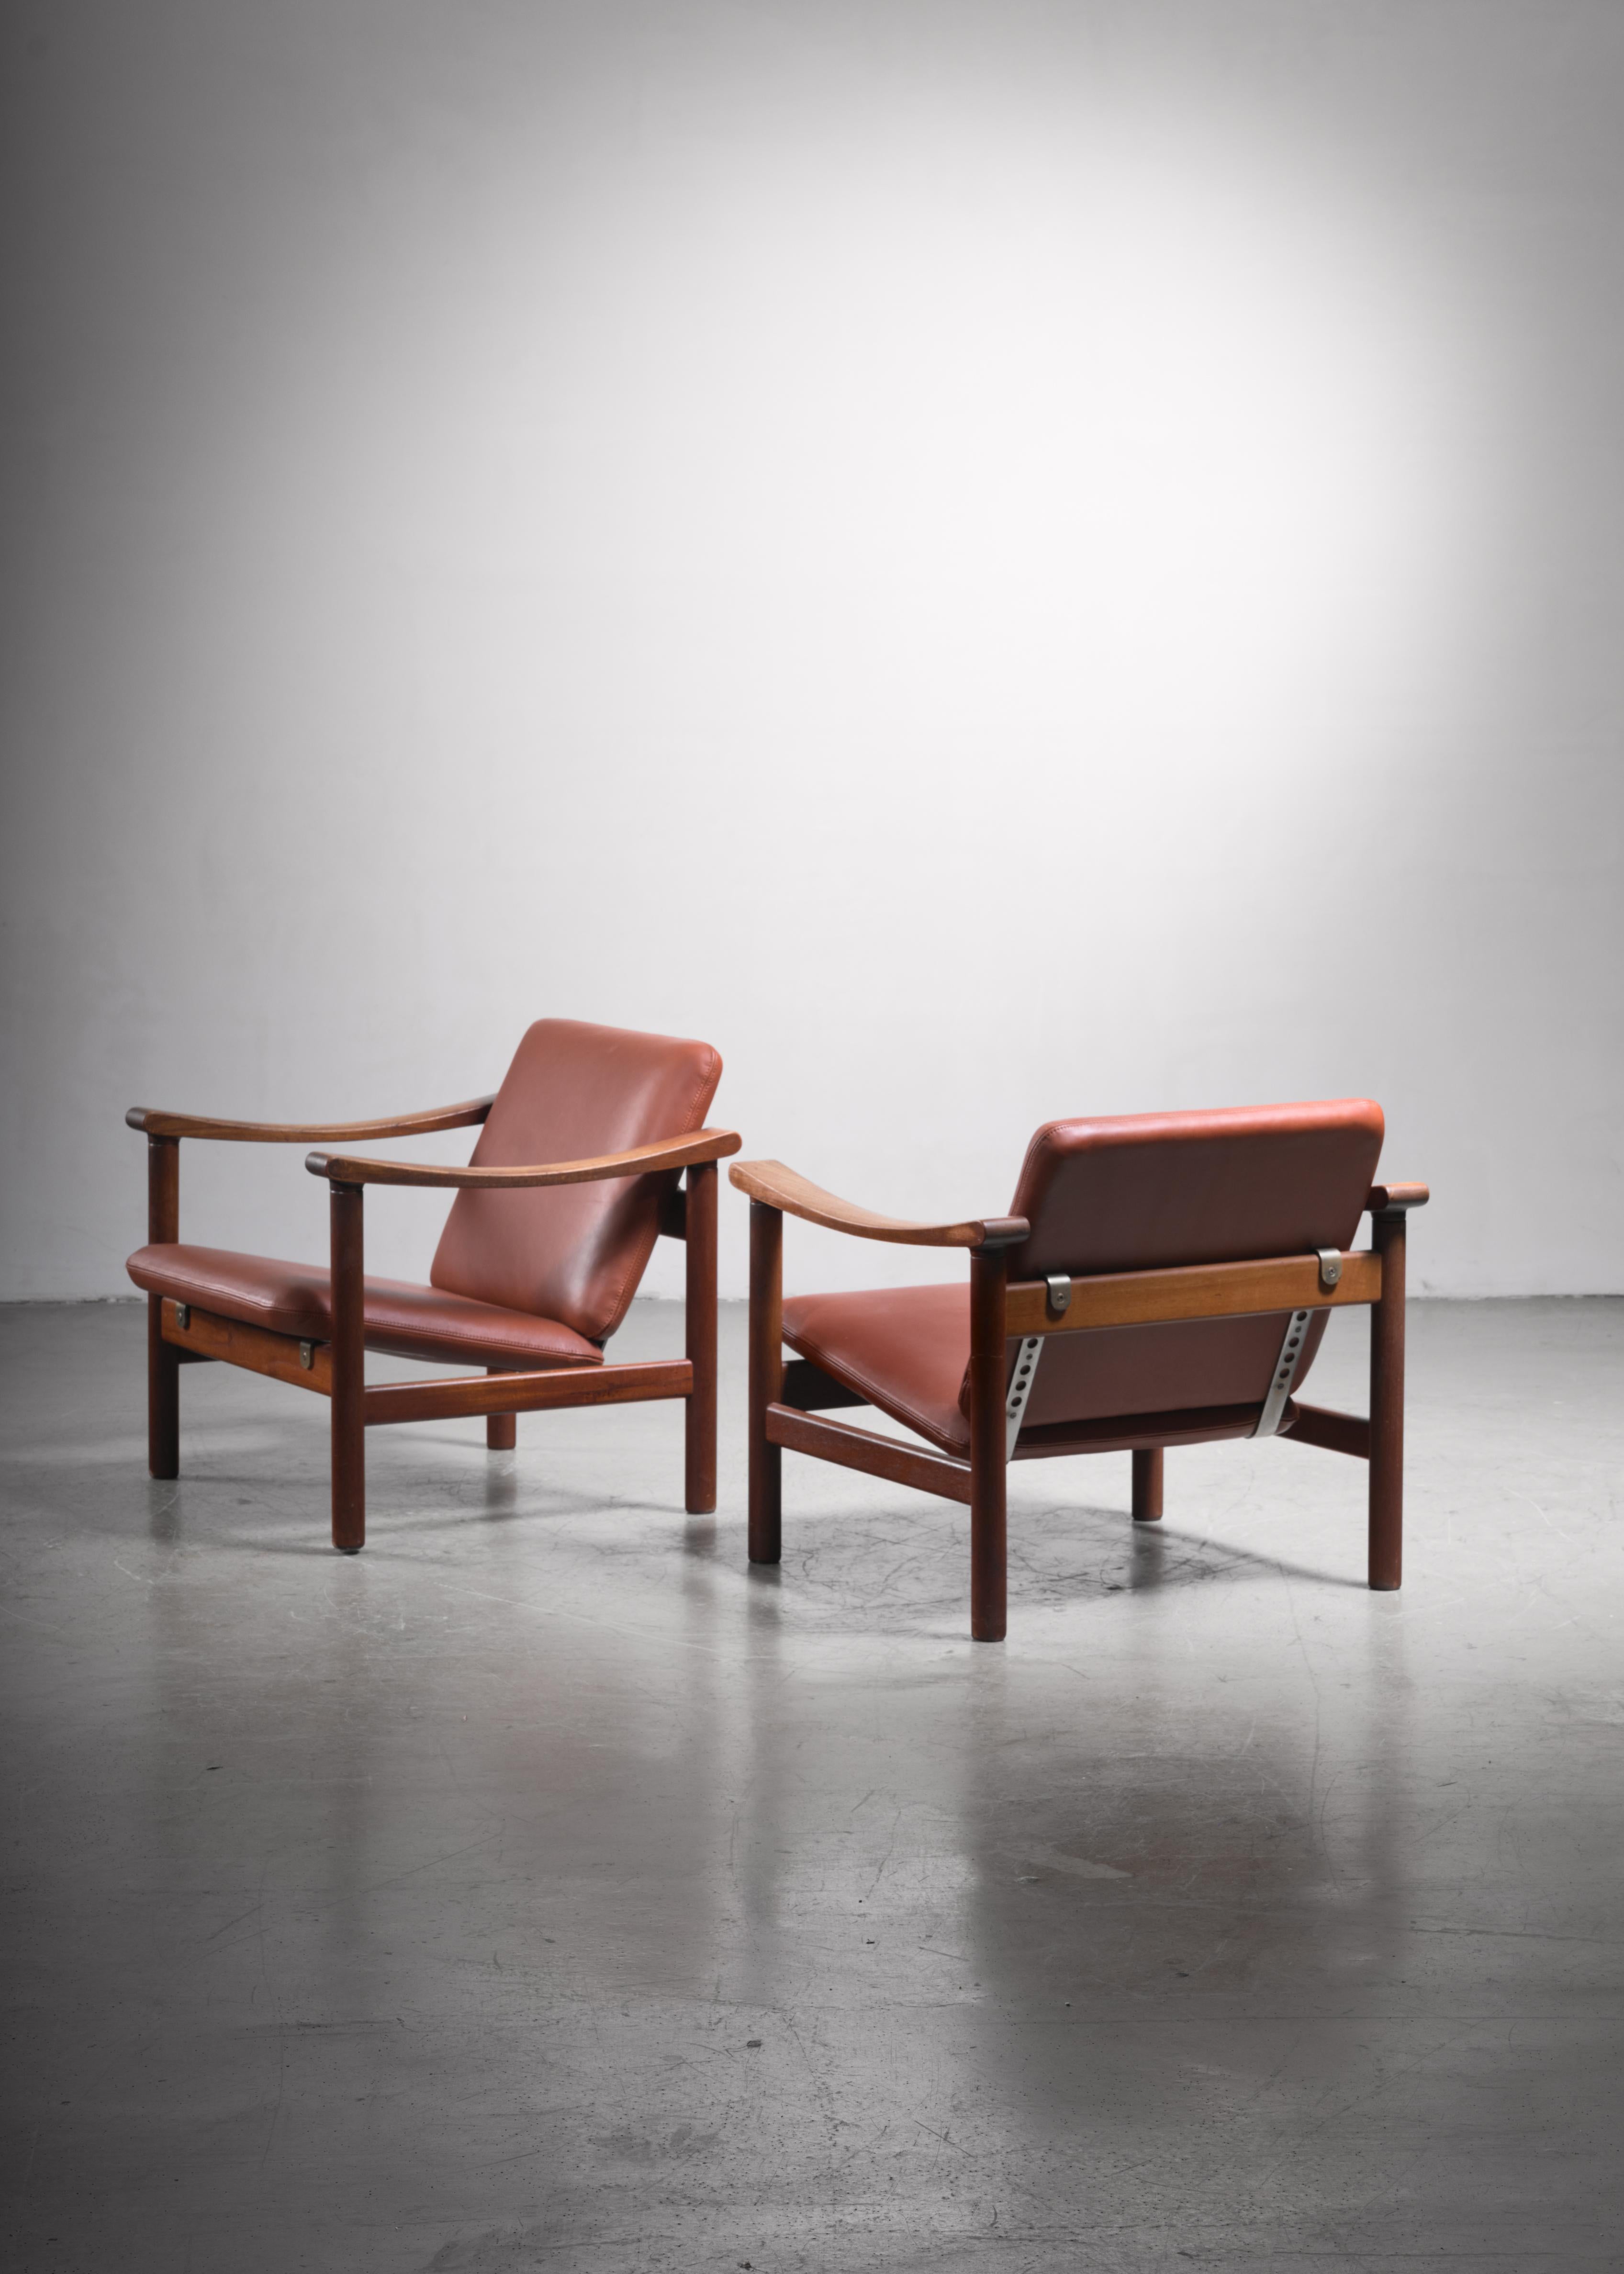 A pair of rare Hans Wegner lounge chairs for Getama, Denmark. The chairs are made of a wooden frame, with a reclining seat and backrest, supported by metal rails. The chairs were professionally reupholstered in our in-house atelier with a beautiful